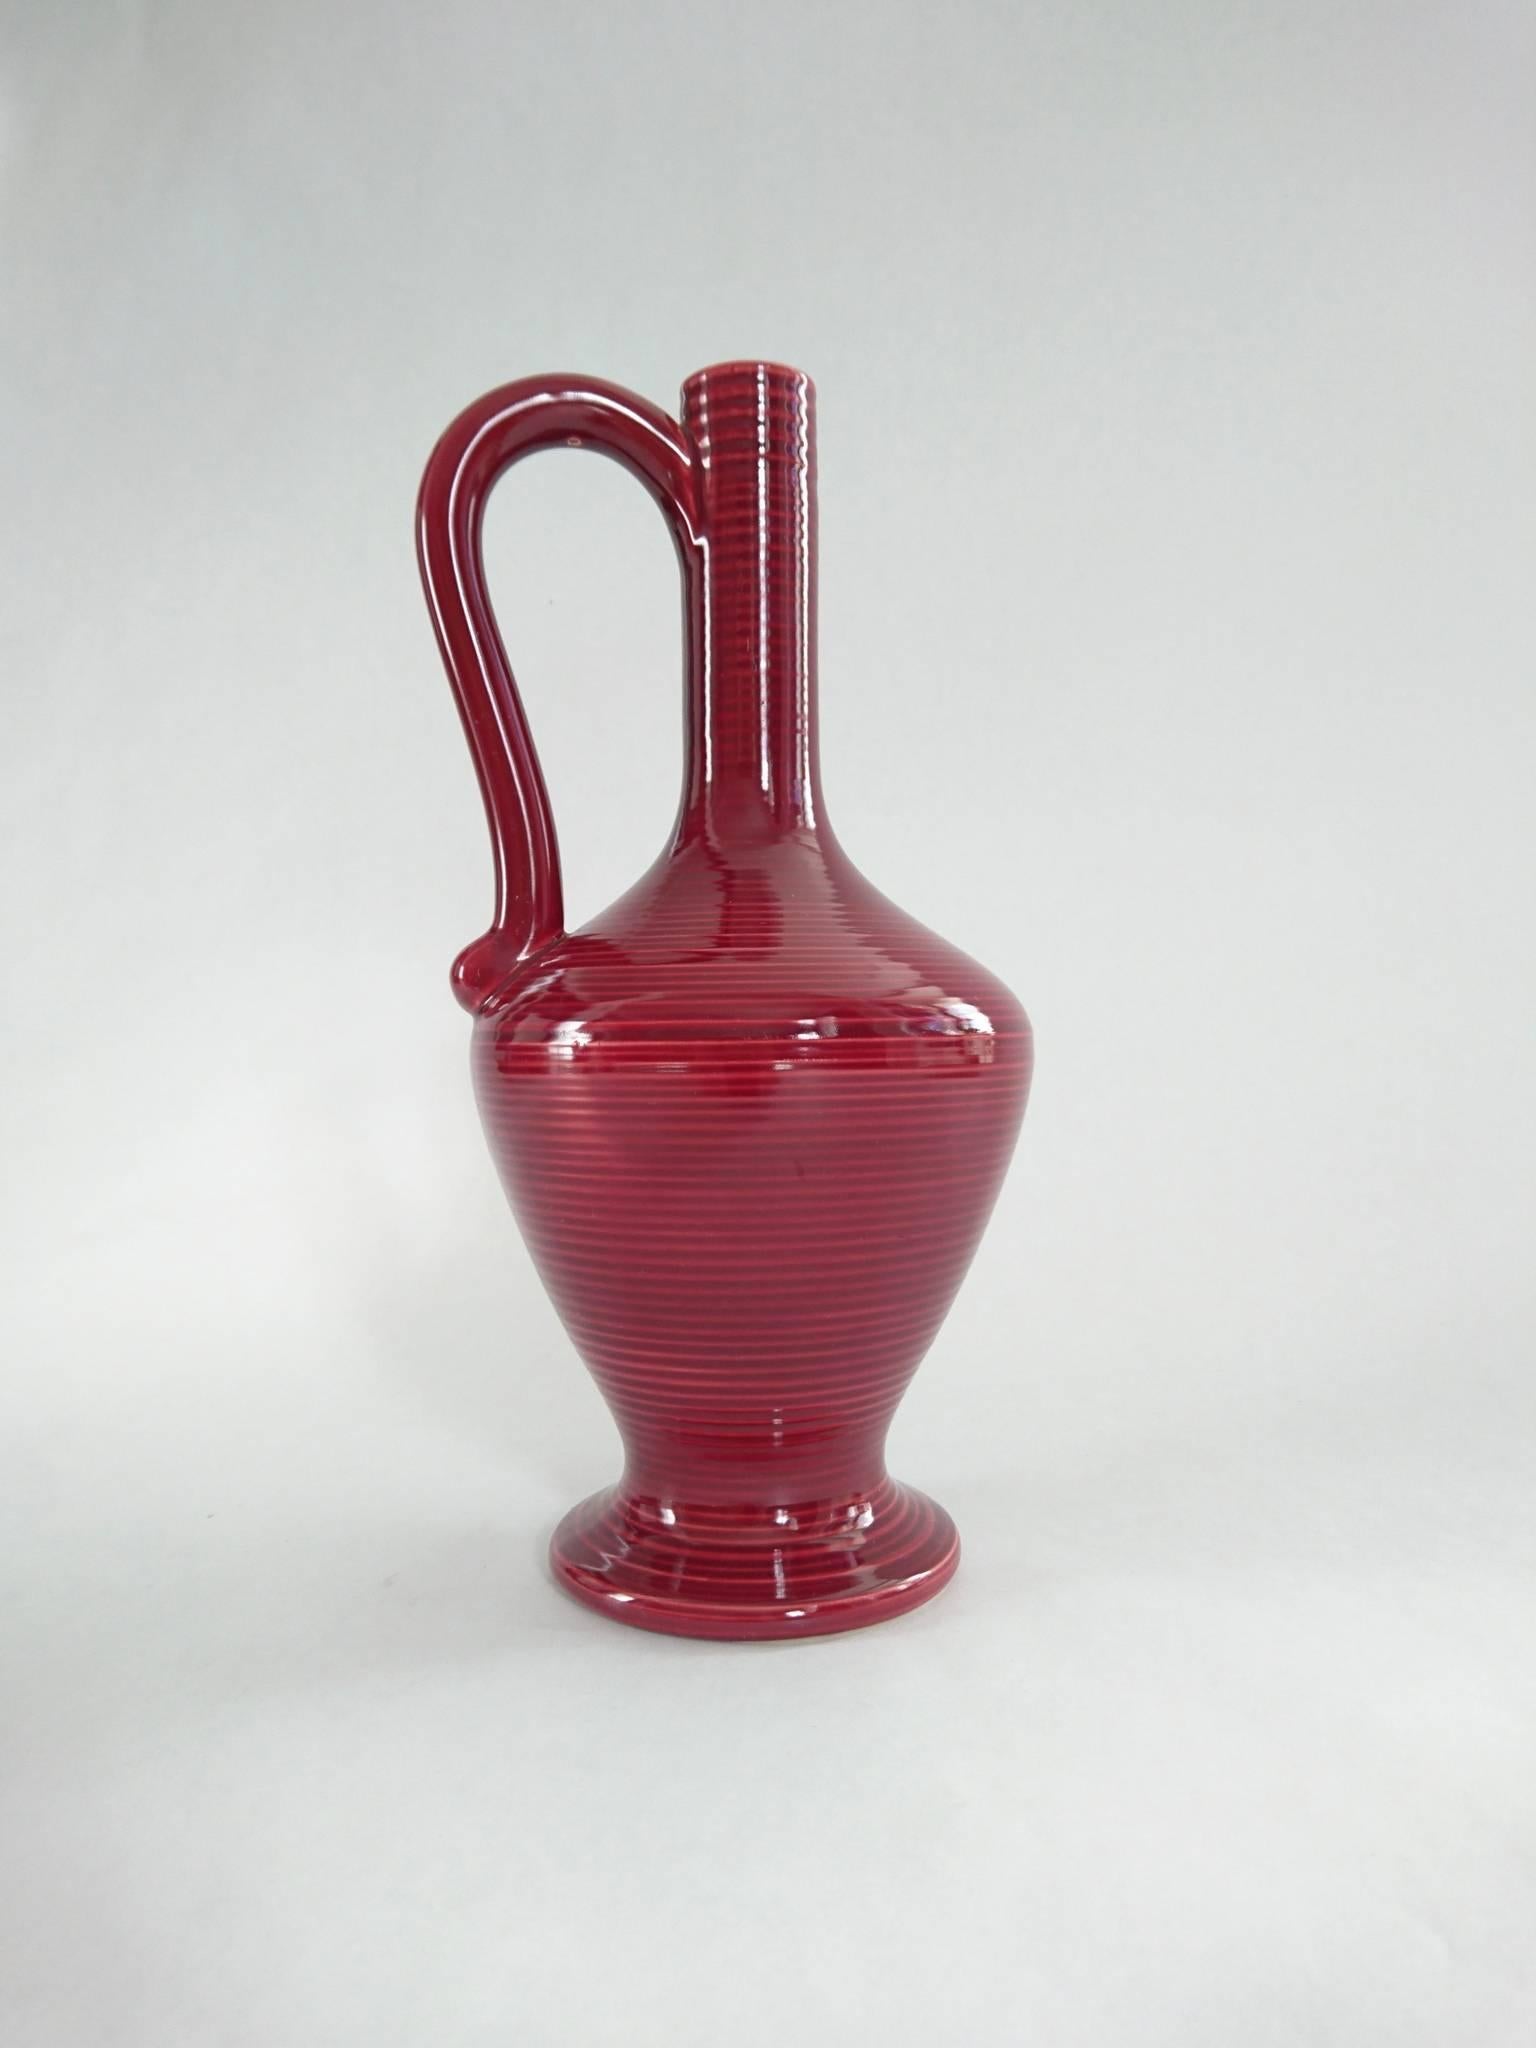 A 1950´s mid-century horizontally striped red ceramic vase with  handle produced by Höganäskeramik, in deep red horizontal stripes by Holm and Bjurestig (H and B) between 1946-1956 which is the period when it was under H and B´s ownership. Marked at